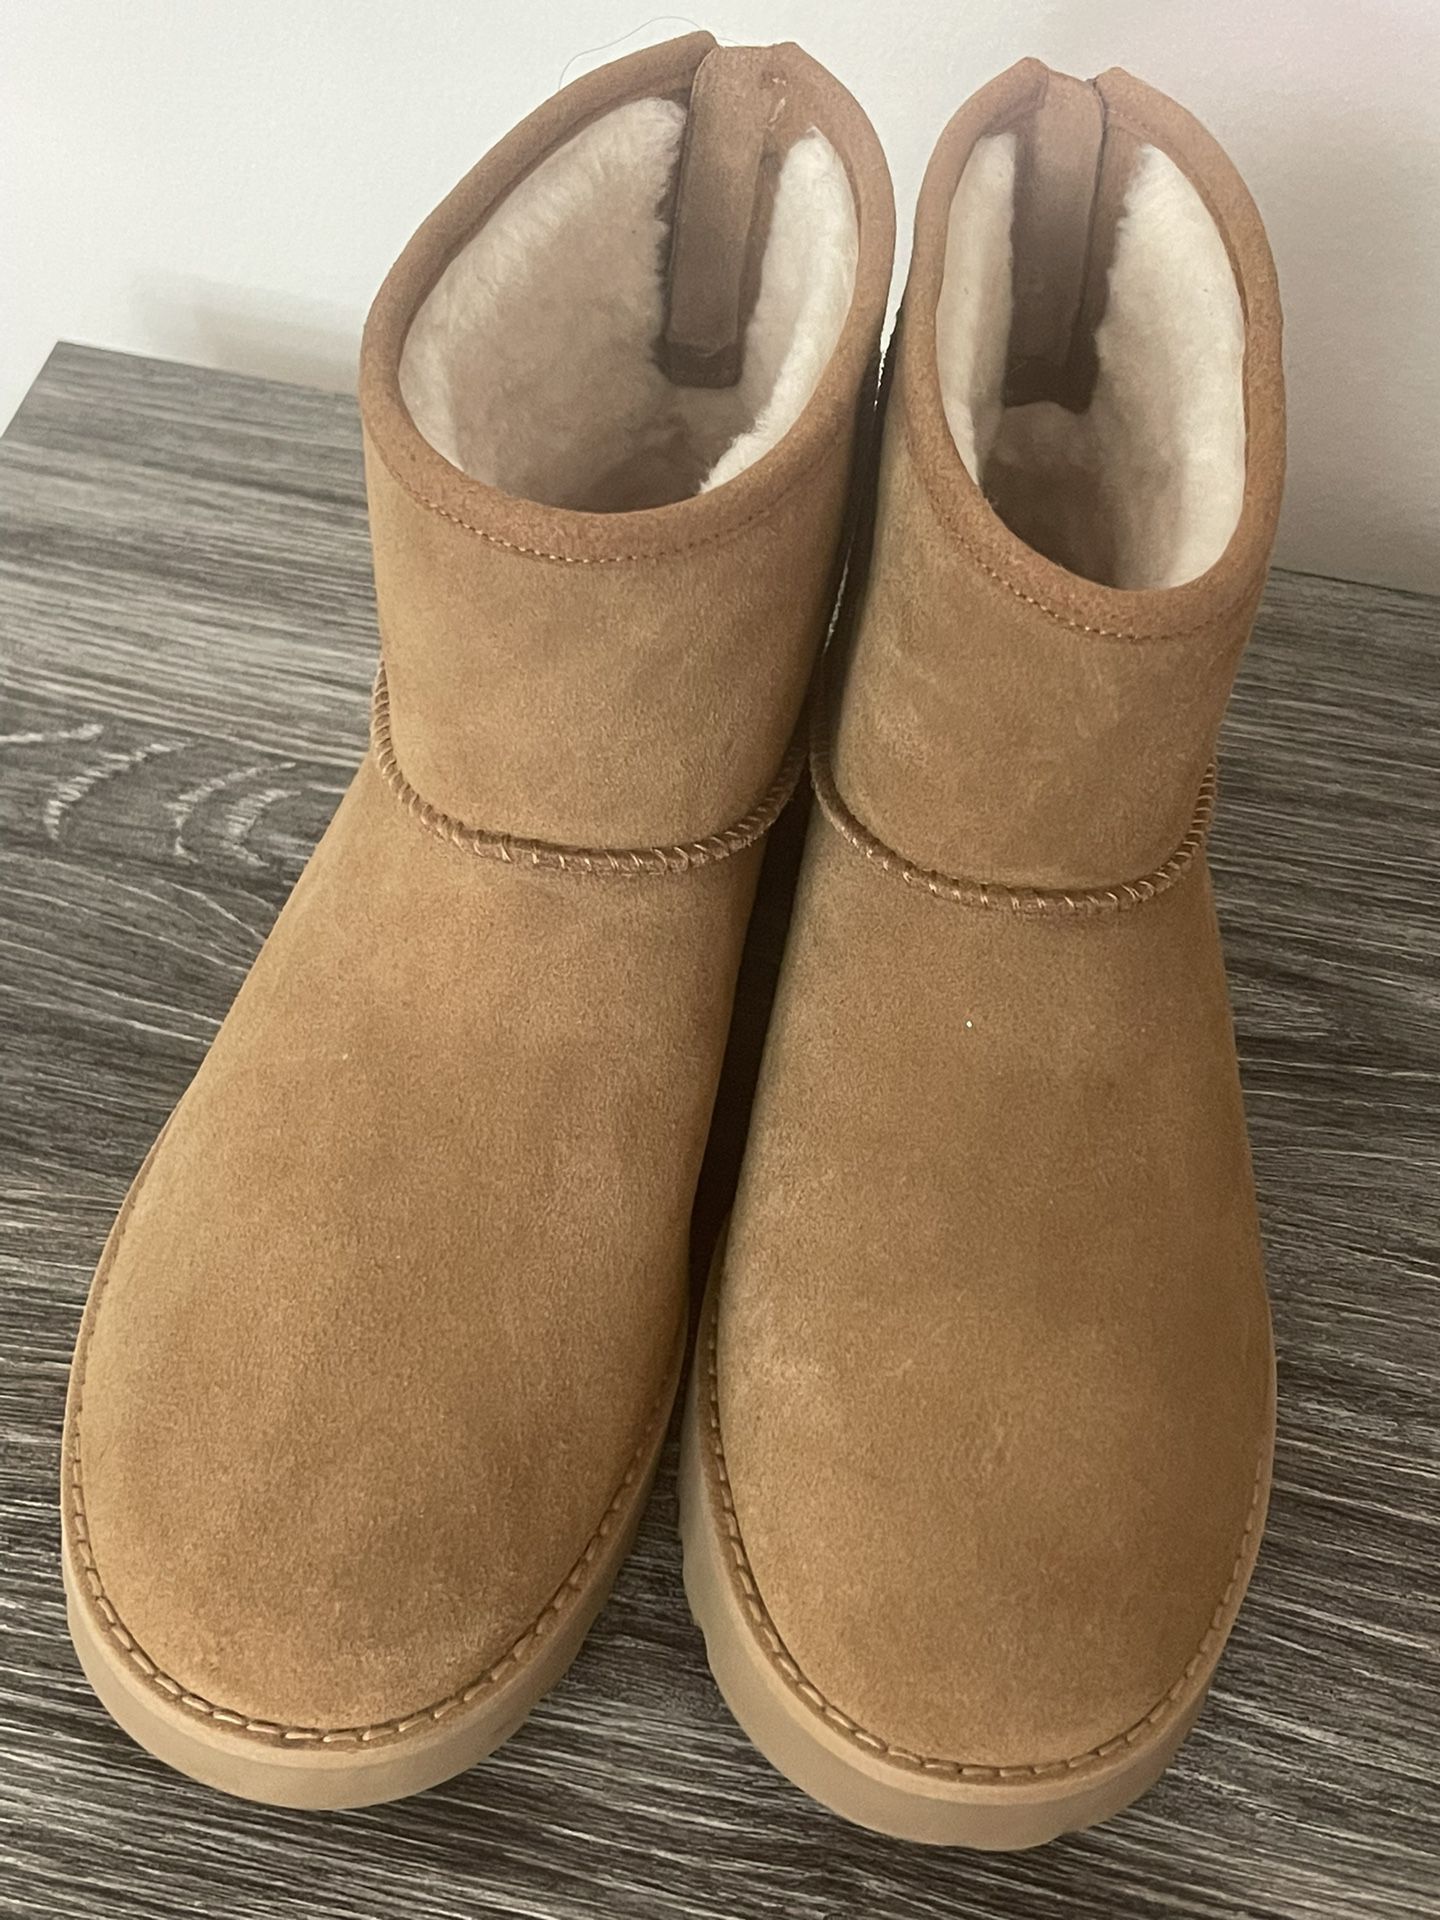 Size 9 UGG boots